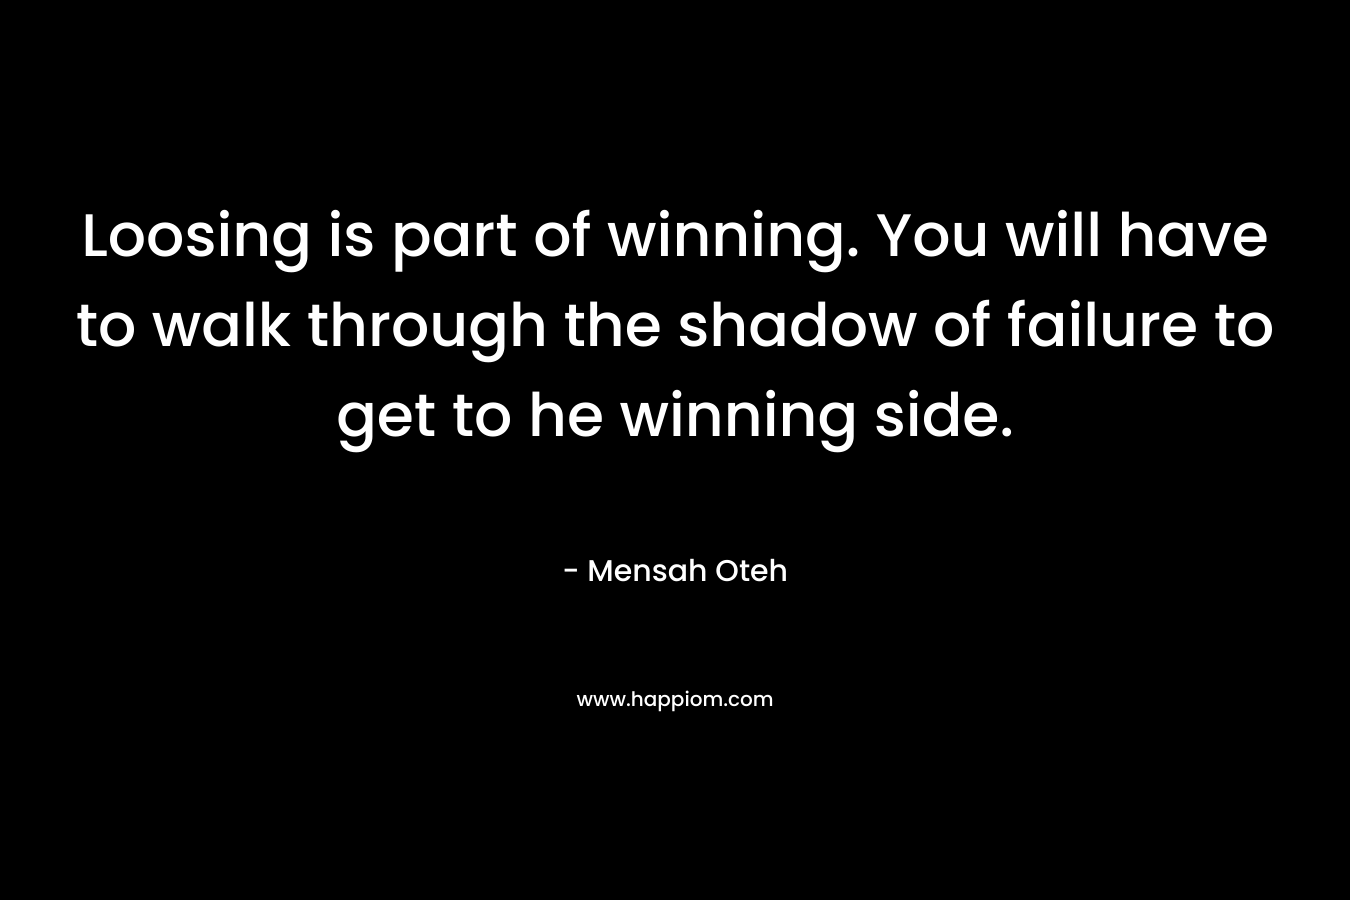 Loosing is part of winning. You will have to walk through the shadow of failure to get to he winning side.